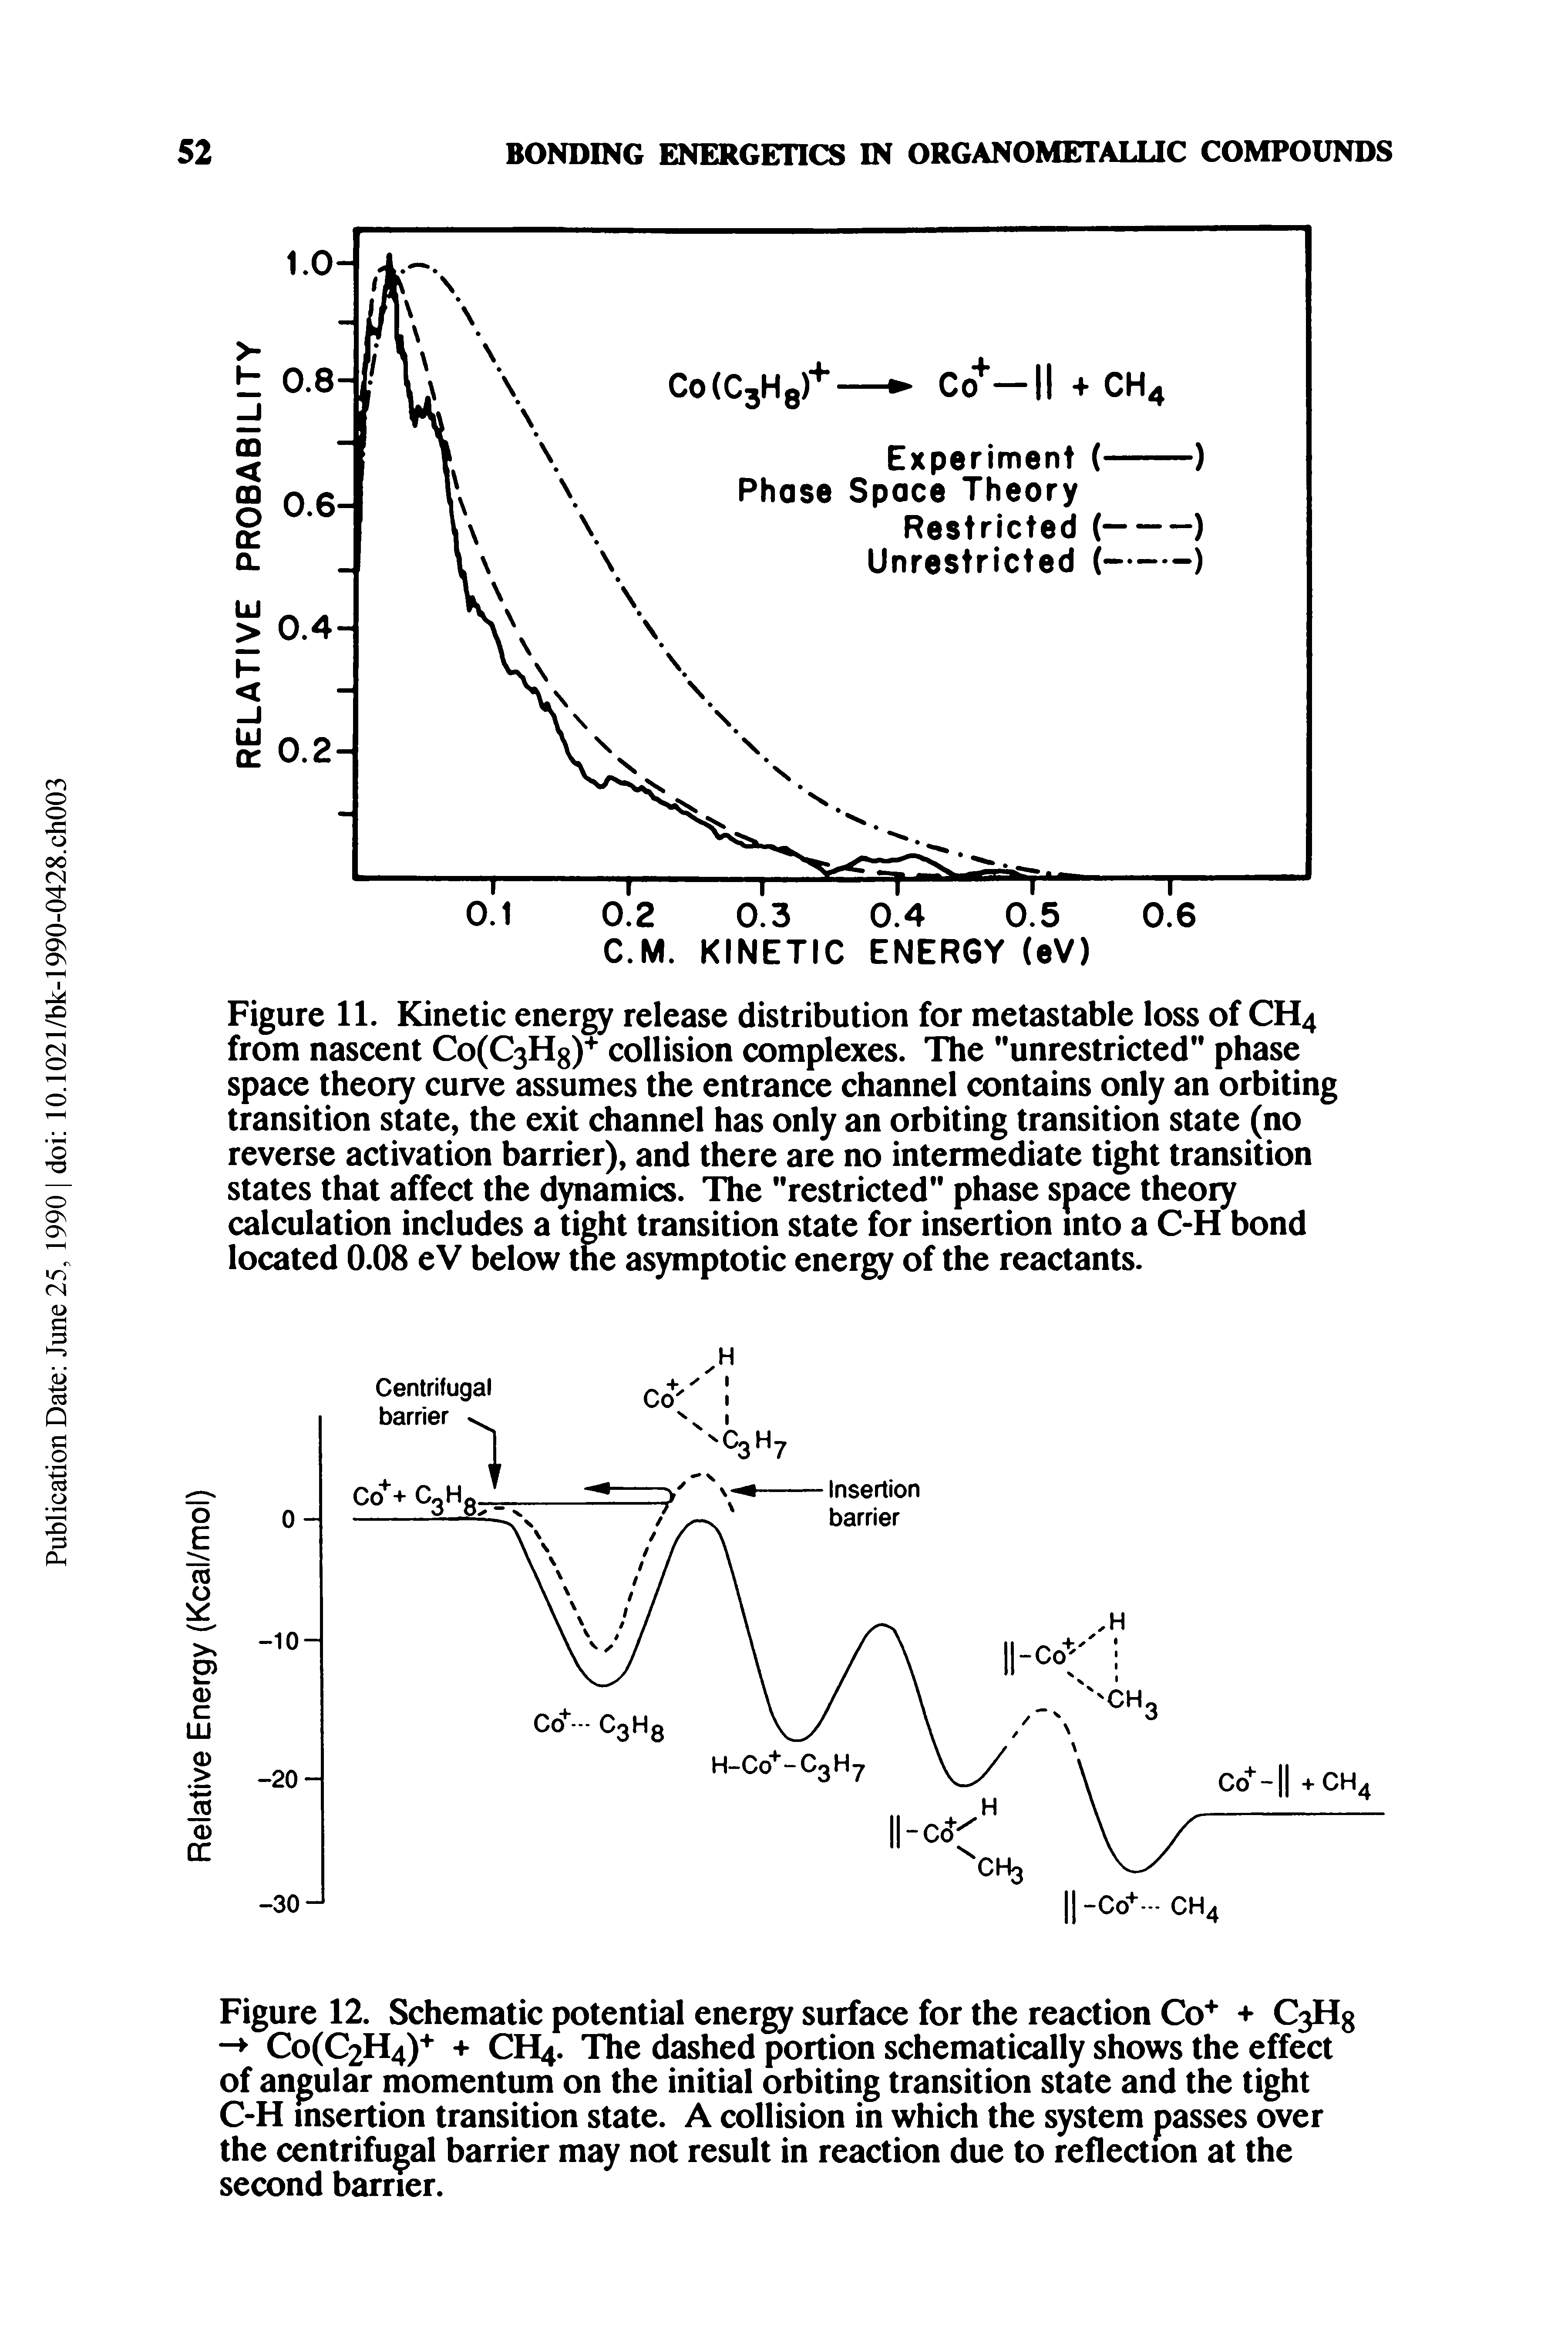 Figure 12. Schematic potential energy surface for the reaction Co + C3H8 Co(C2H4)+ + CH4. The dashed portion schematically shows the effect of angular momentum on the initial orbiting transition state and the tight C-H insertion transition state. A collision in which the system passes over the centrifugal barrier may not result in reaction due to reflection at the second barrier.